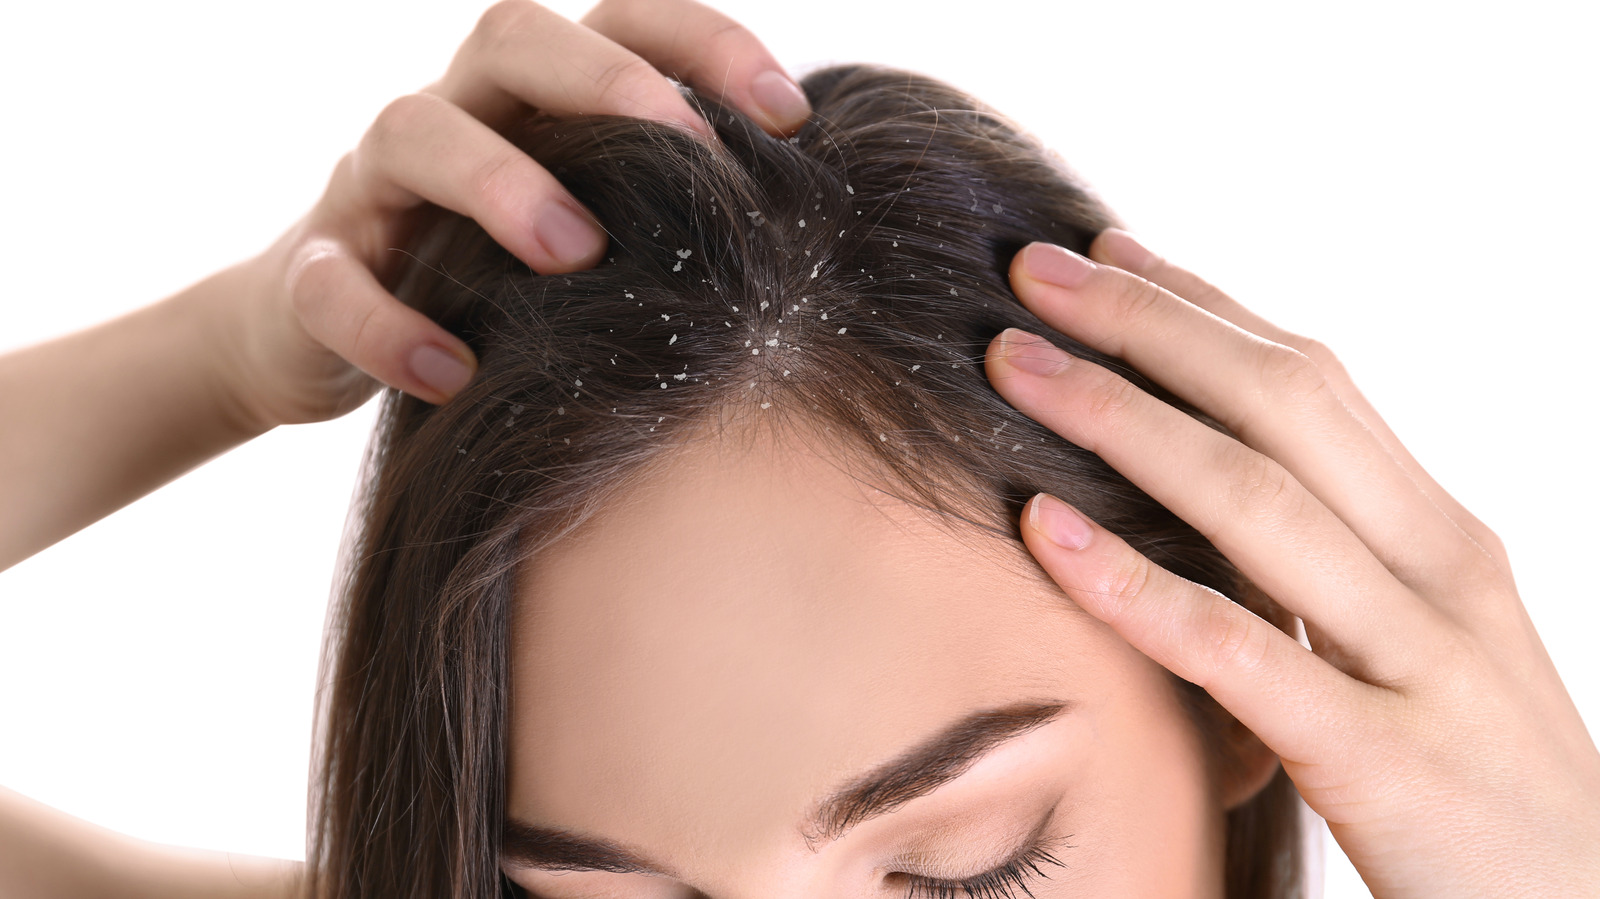 How To Tell If You Have Scalp Psoriasis Vs. Dandruff